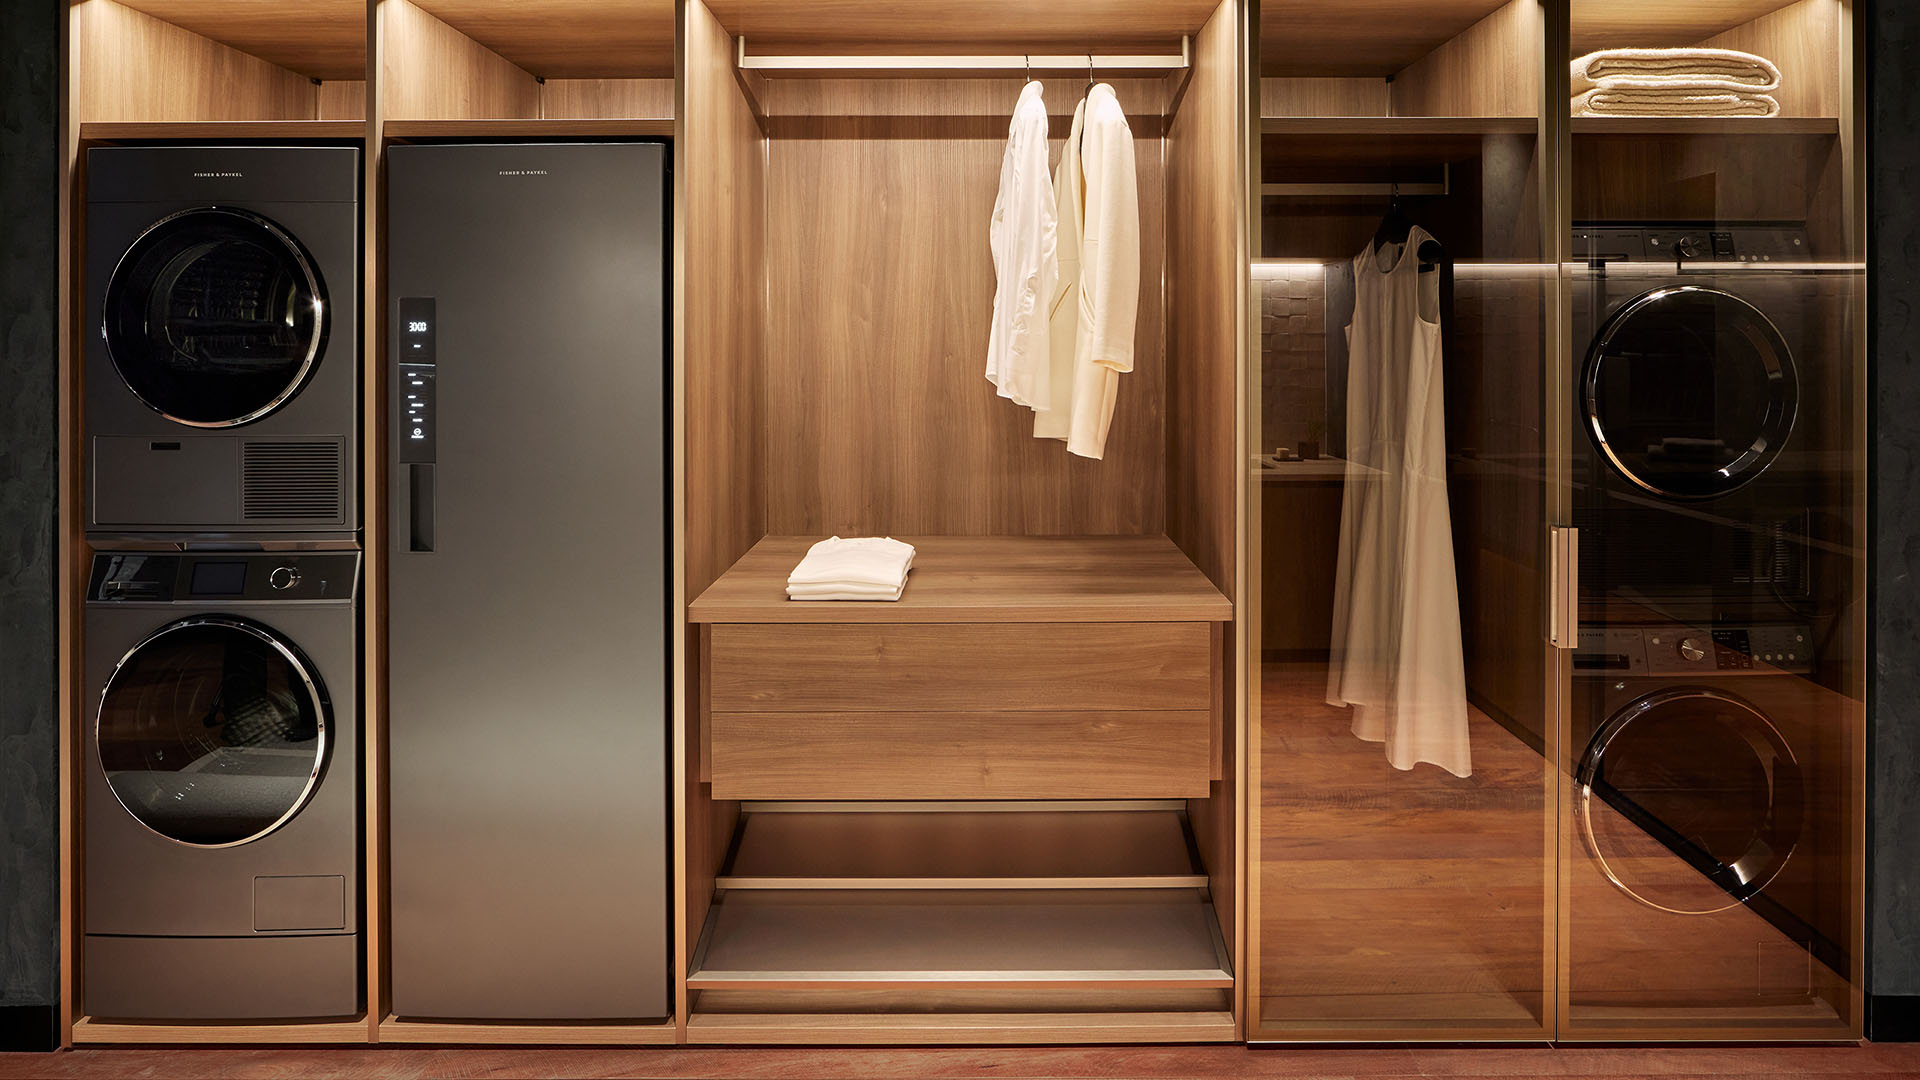 shot of the wardrobe system - showcasing the Fabric Care Cabinet and Steam Care washer and dryer